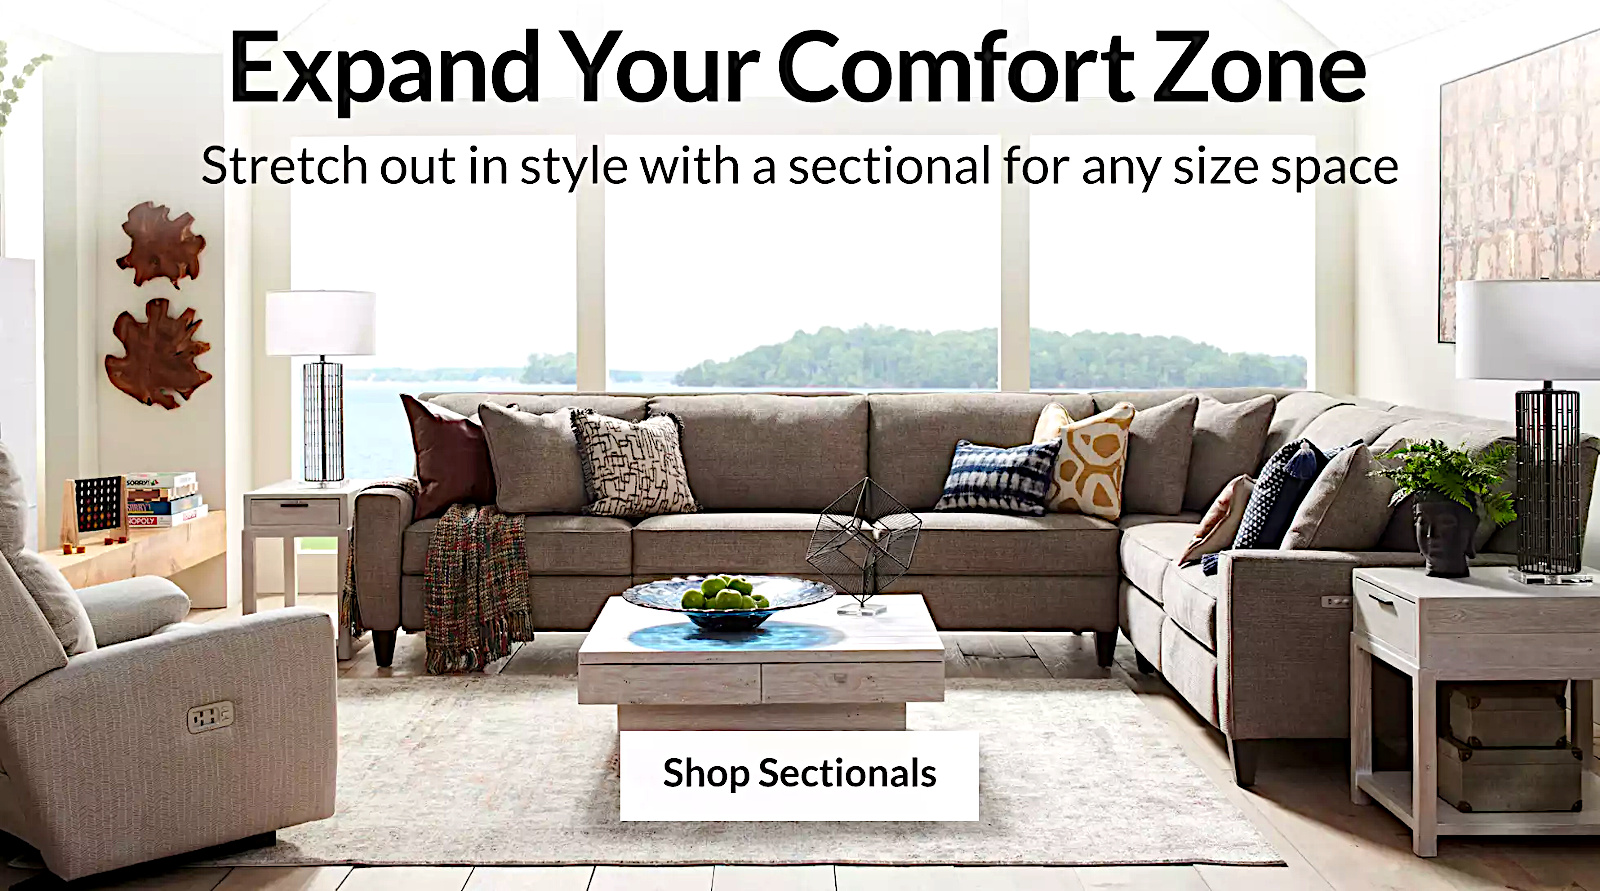 Expand your comfort zone cut-price